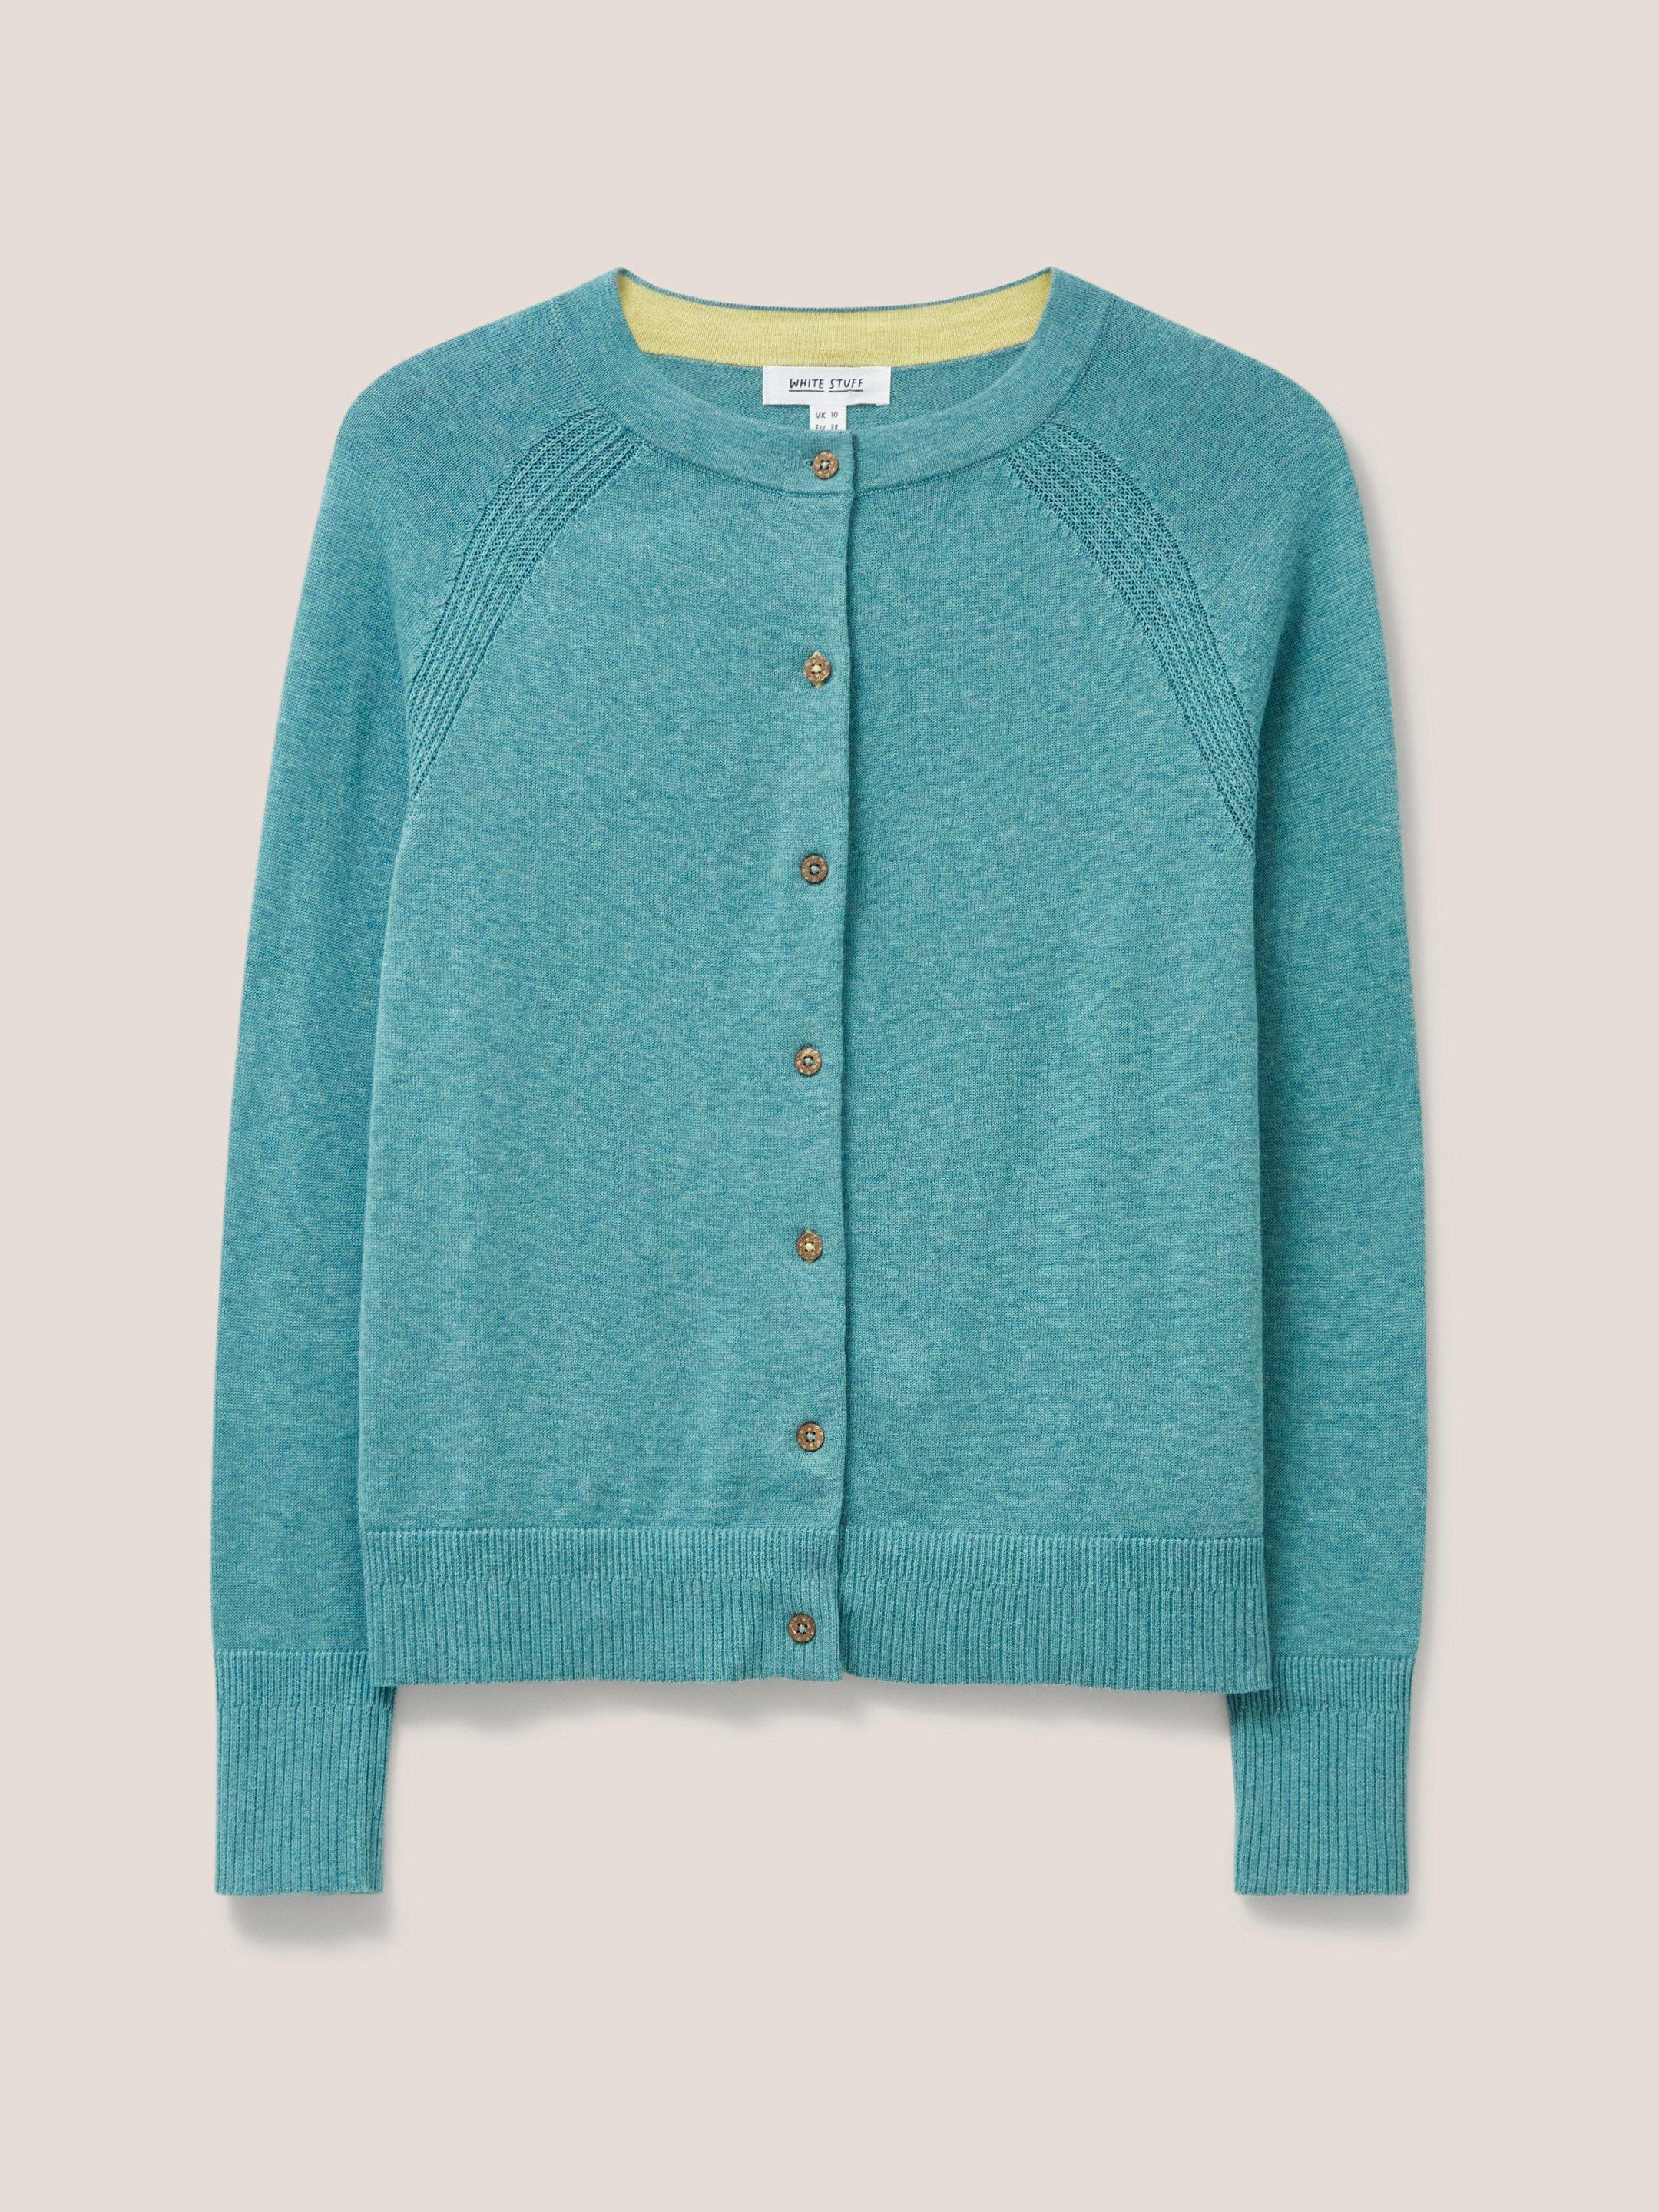 Lulu Knit Cardigan in MID TEAL - FLAT FRONT